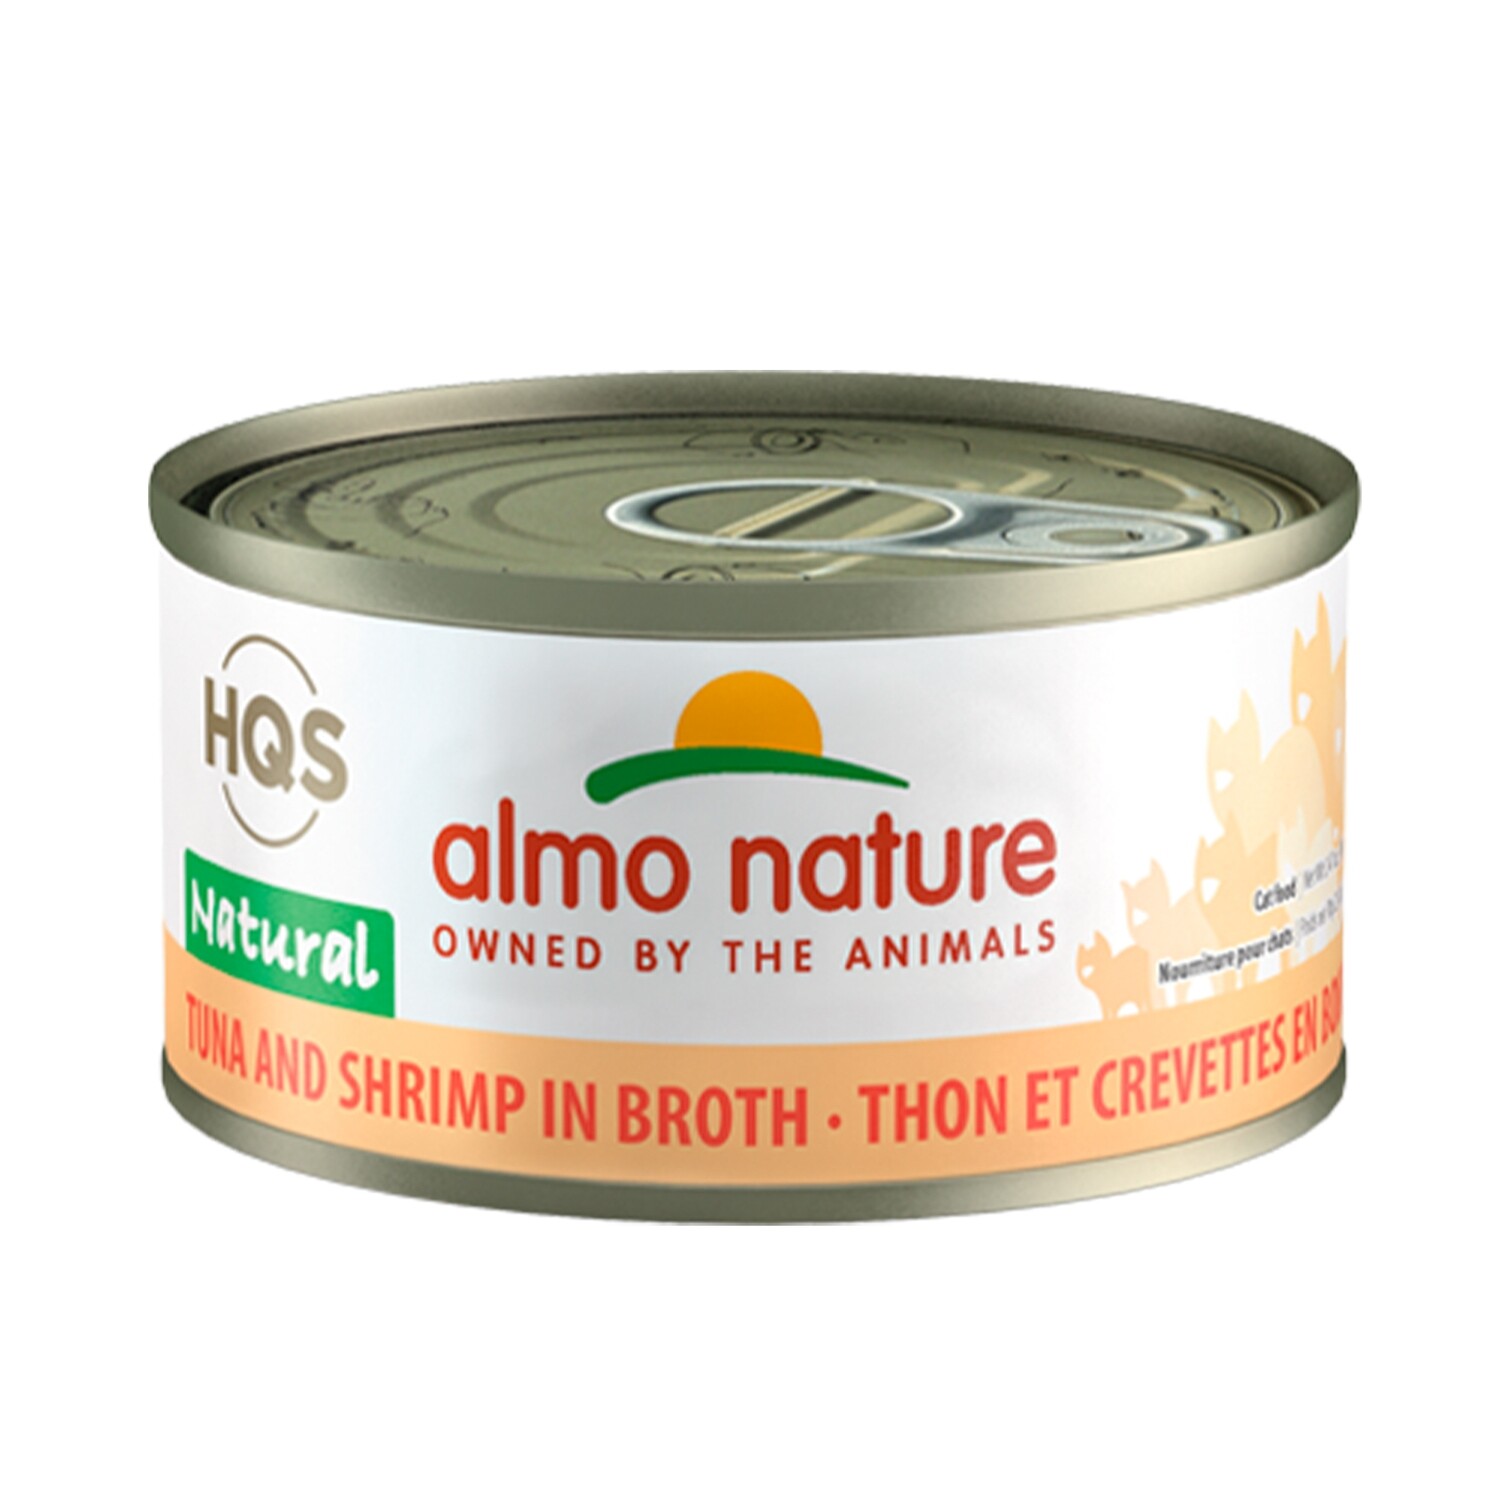 Almo Nature HQS Tuna and Shrimps Breast Canned Cat Food-70g/2.5oz - 吞拿虾肉猫罐头